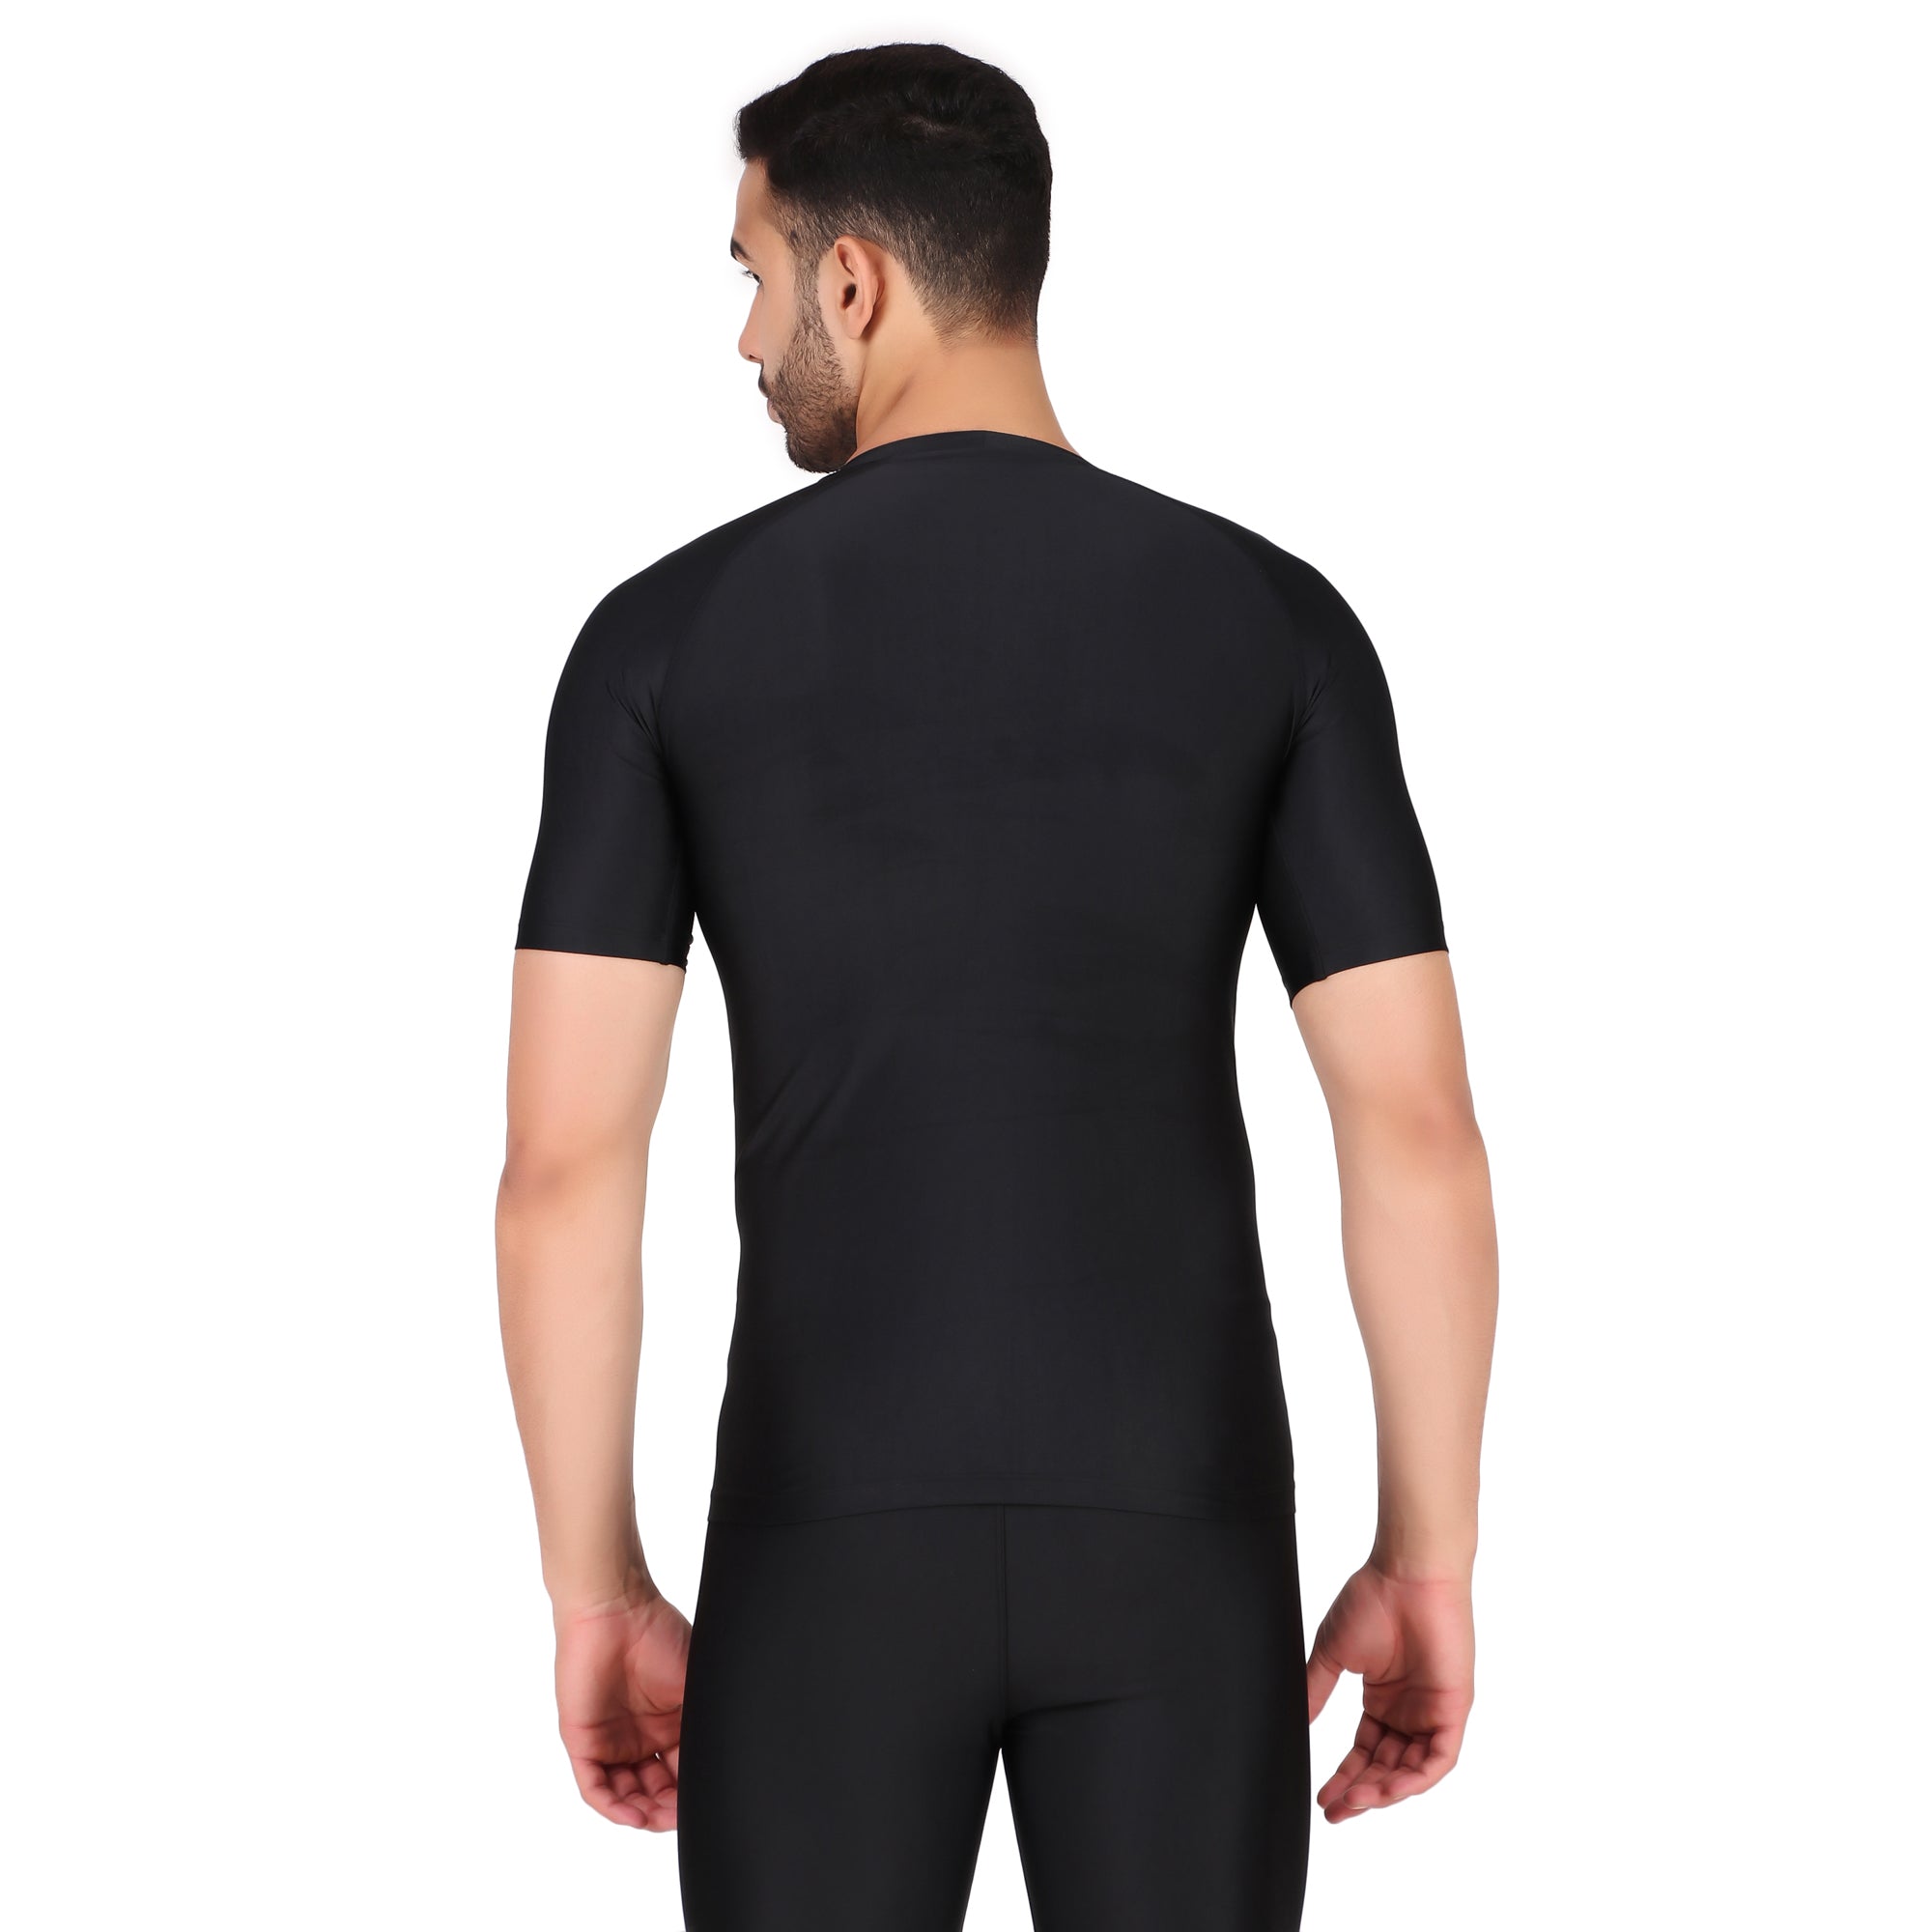 Recharge Polyester Compression Top Half Sleeve (Black)